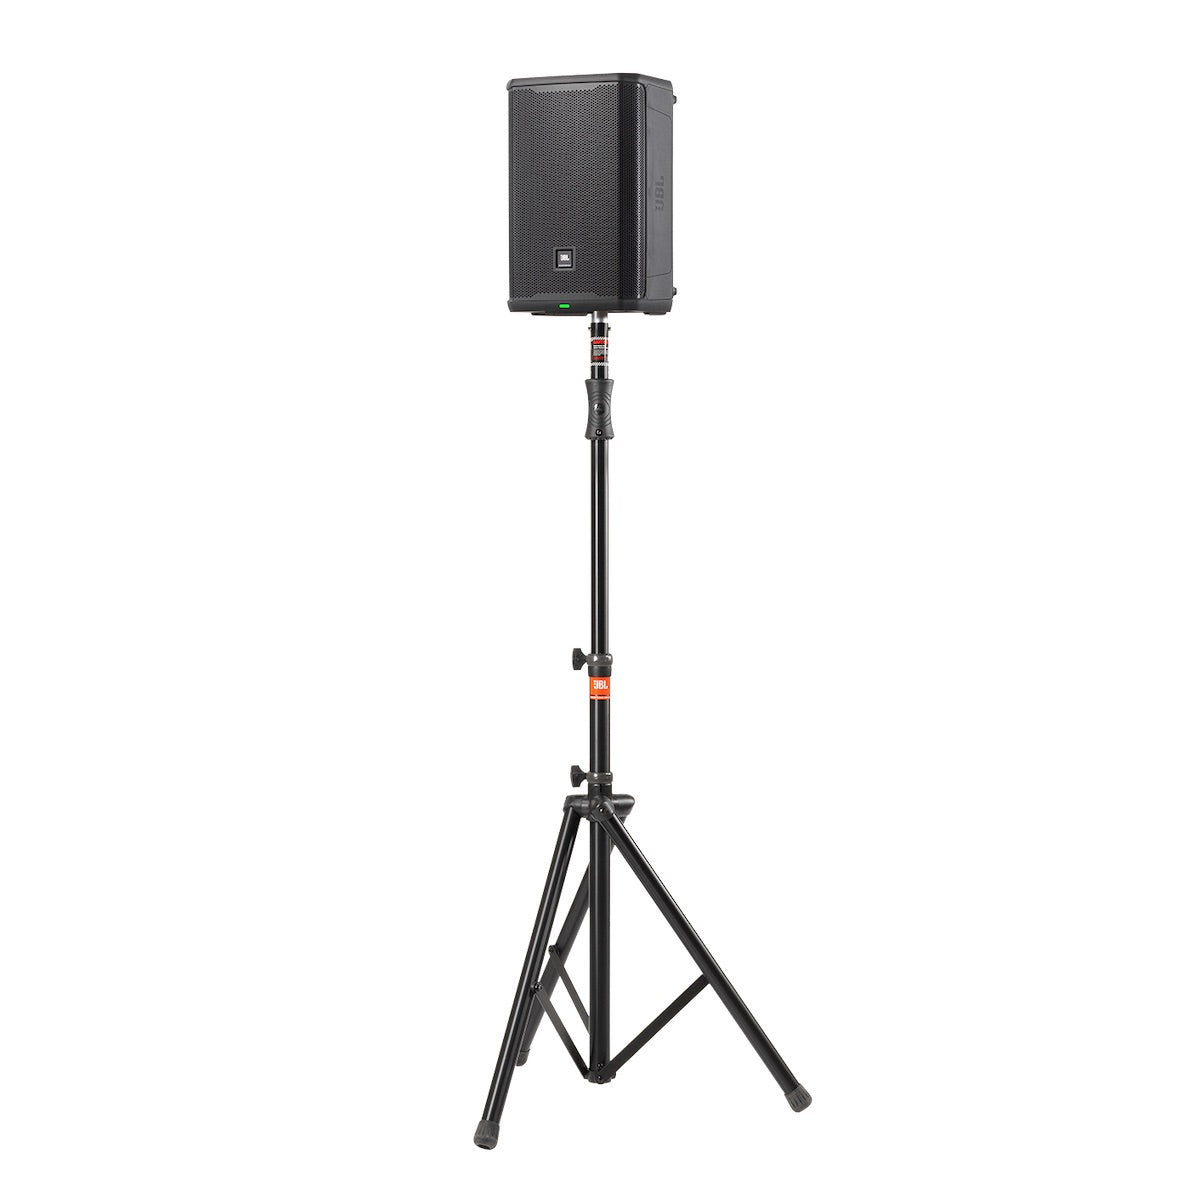 JBL PRX908 - Portable 8-inch Two-Way Powered Loudspeaker, stand mount